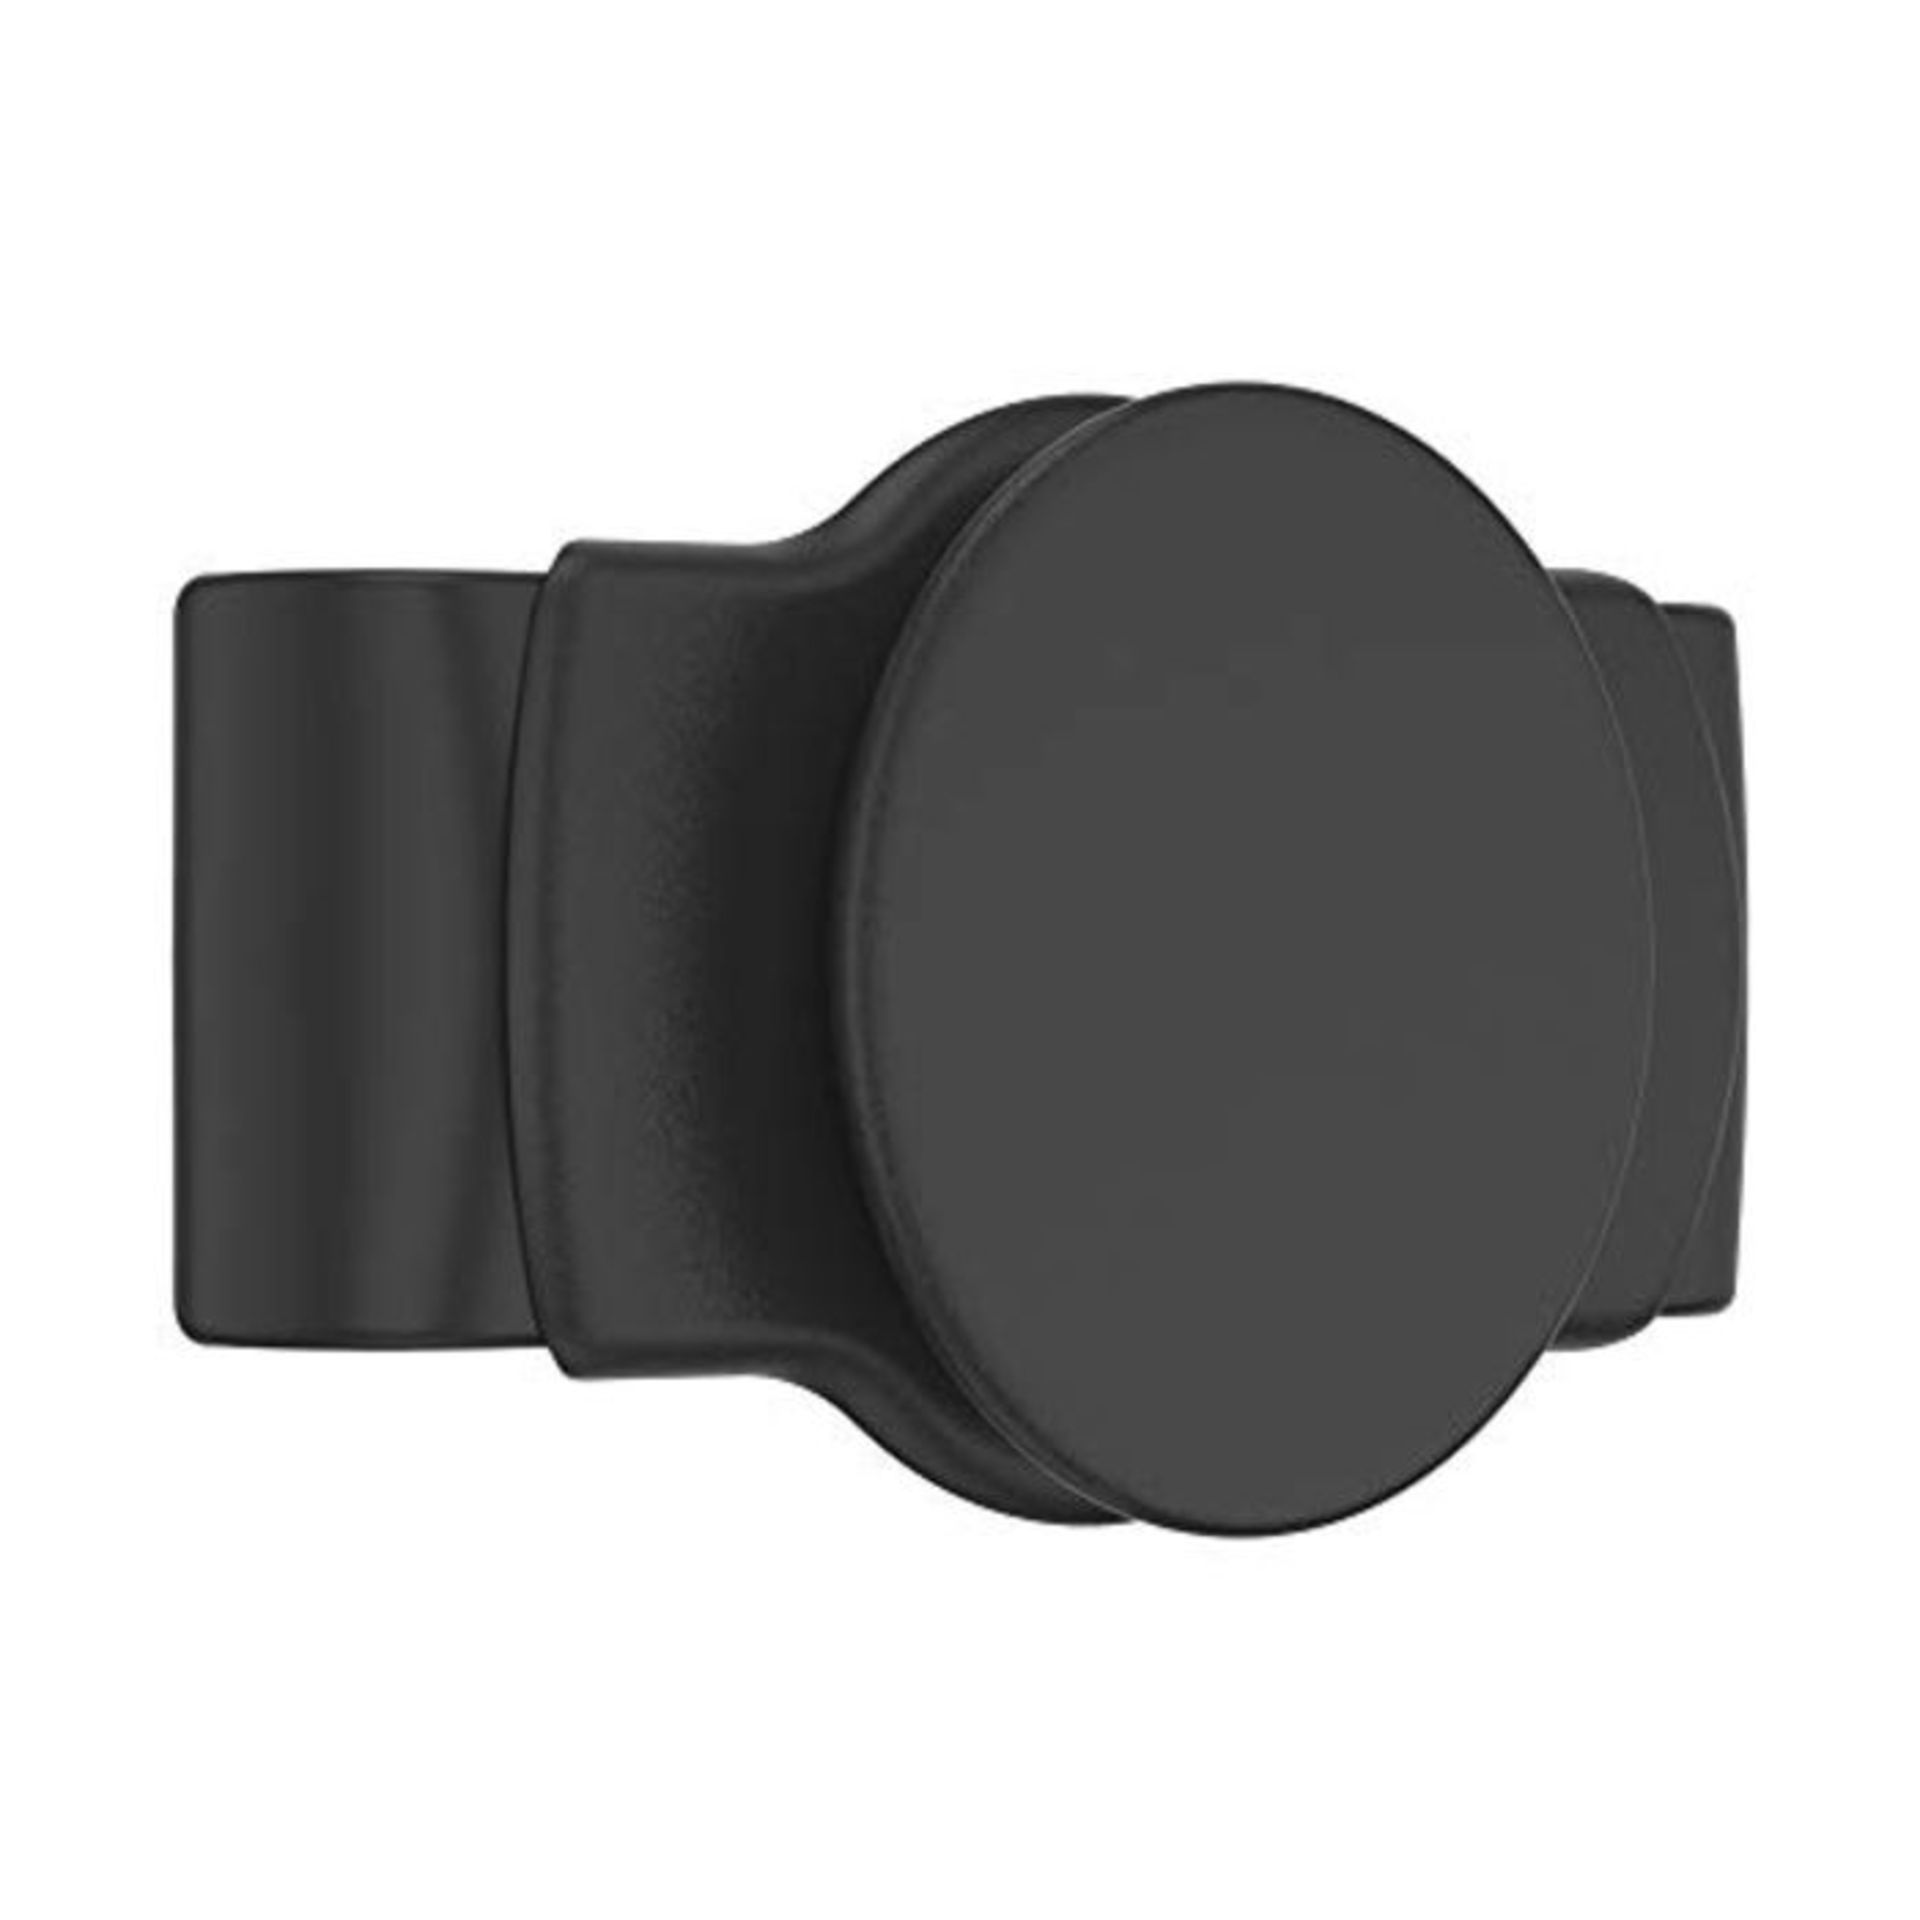 PopSockets: PopGrip Slide Stretch Non-Adhesive Phone Grip & Stand With a Swappable Top - Image 3 of 4